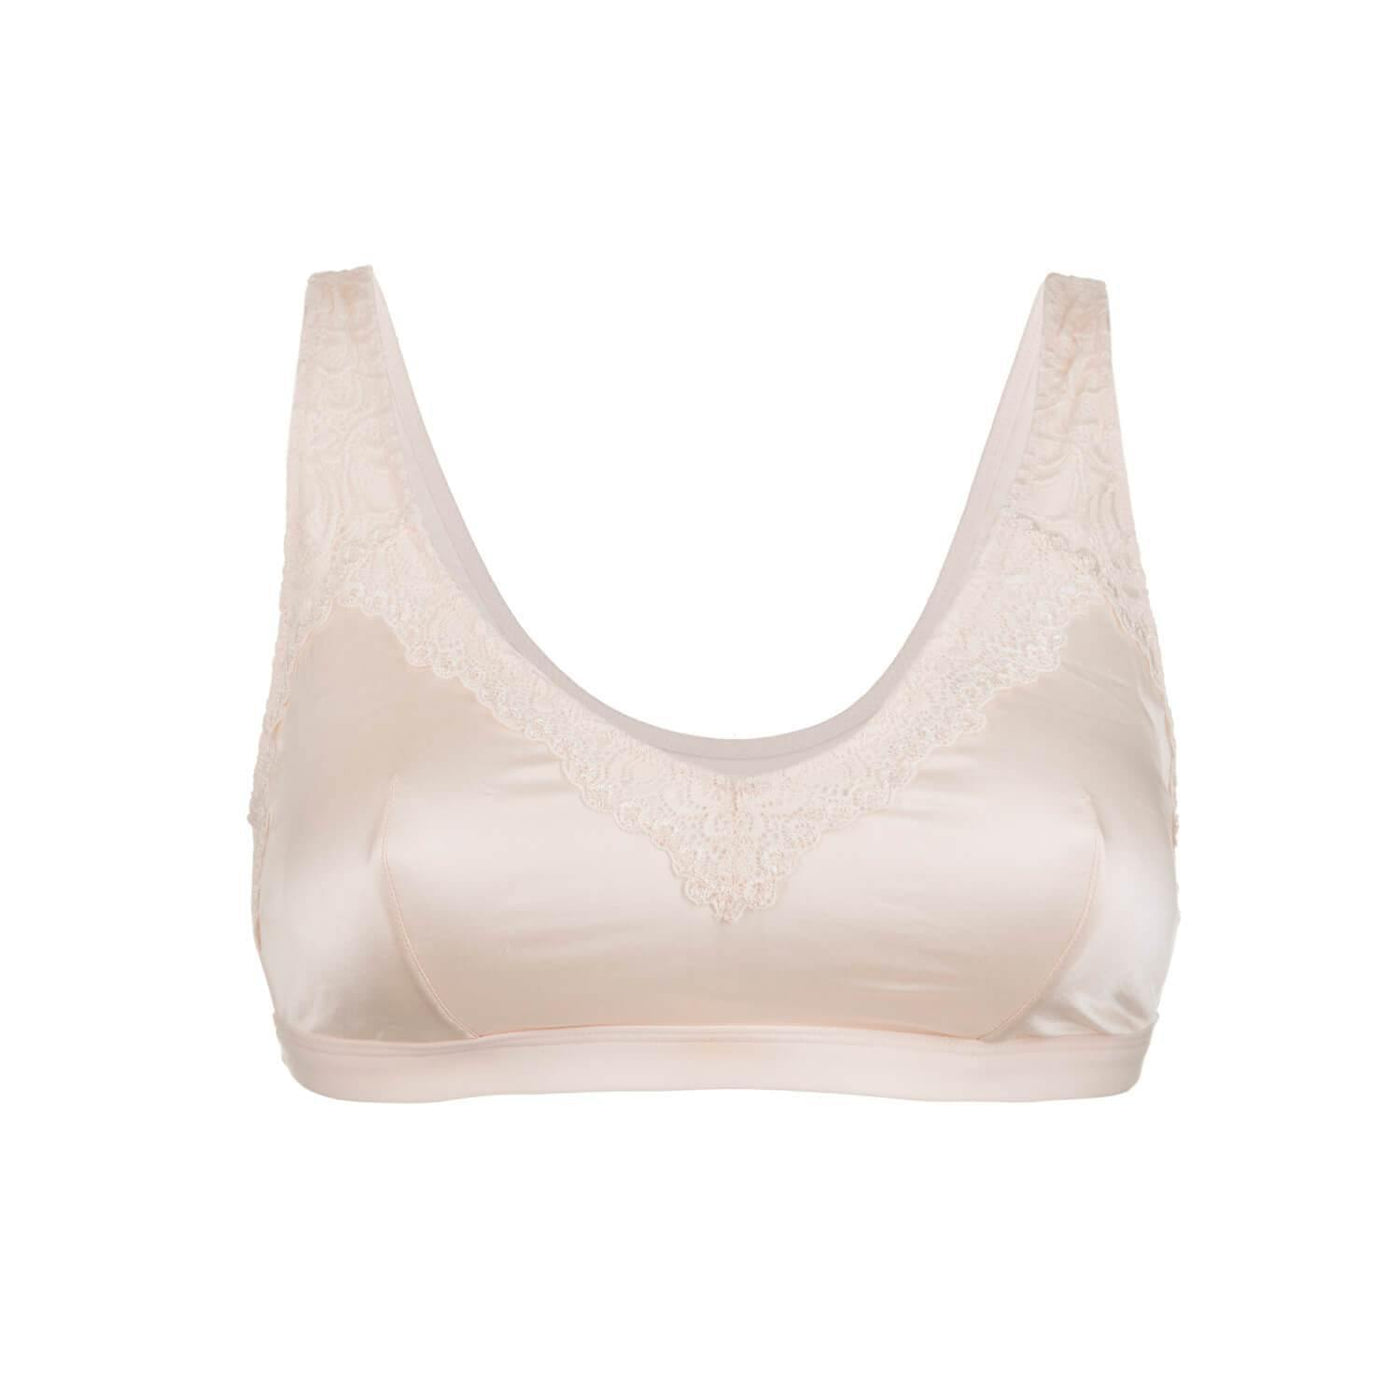 Back Support Full Coverage Wireless Organic Cotton bra (Champagne & Black) - Juliemay Lingerie